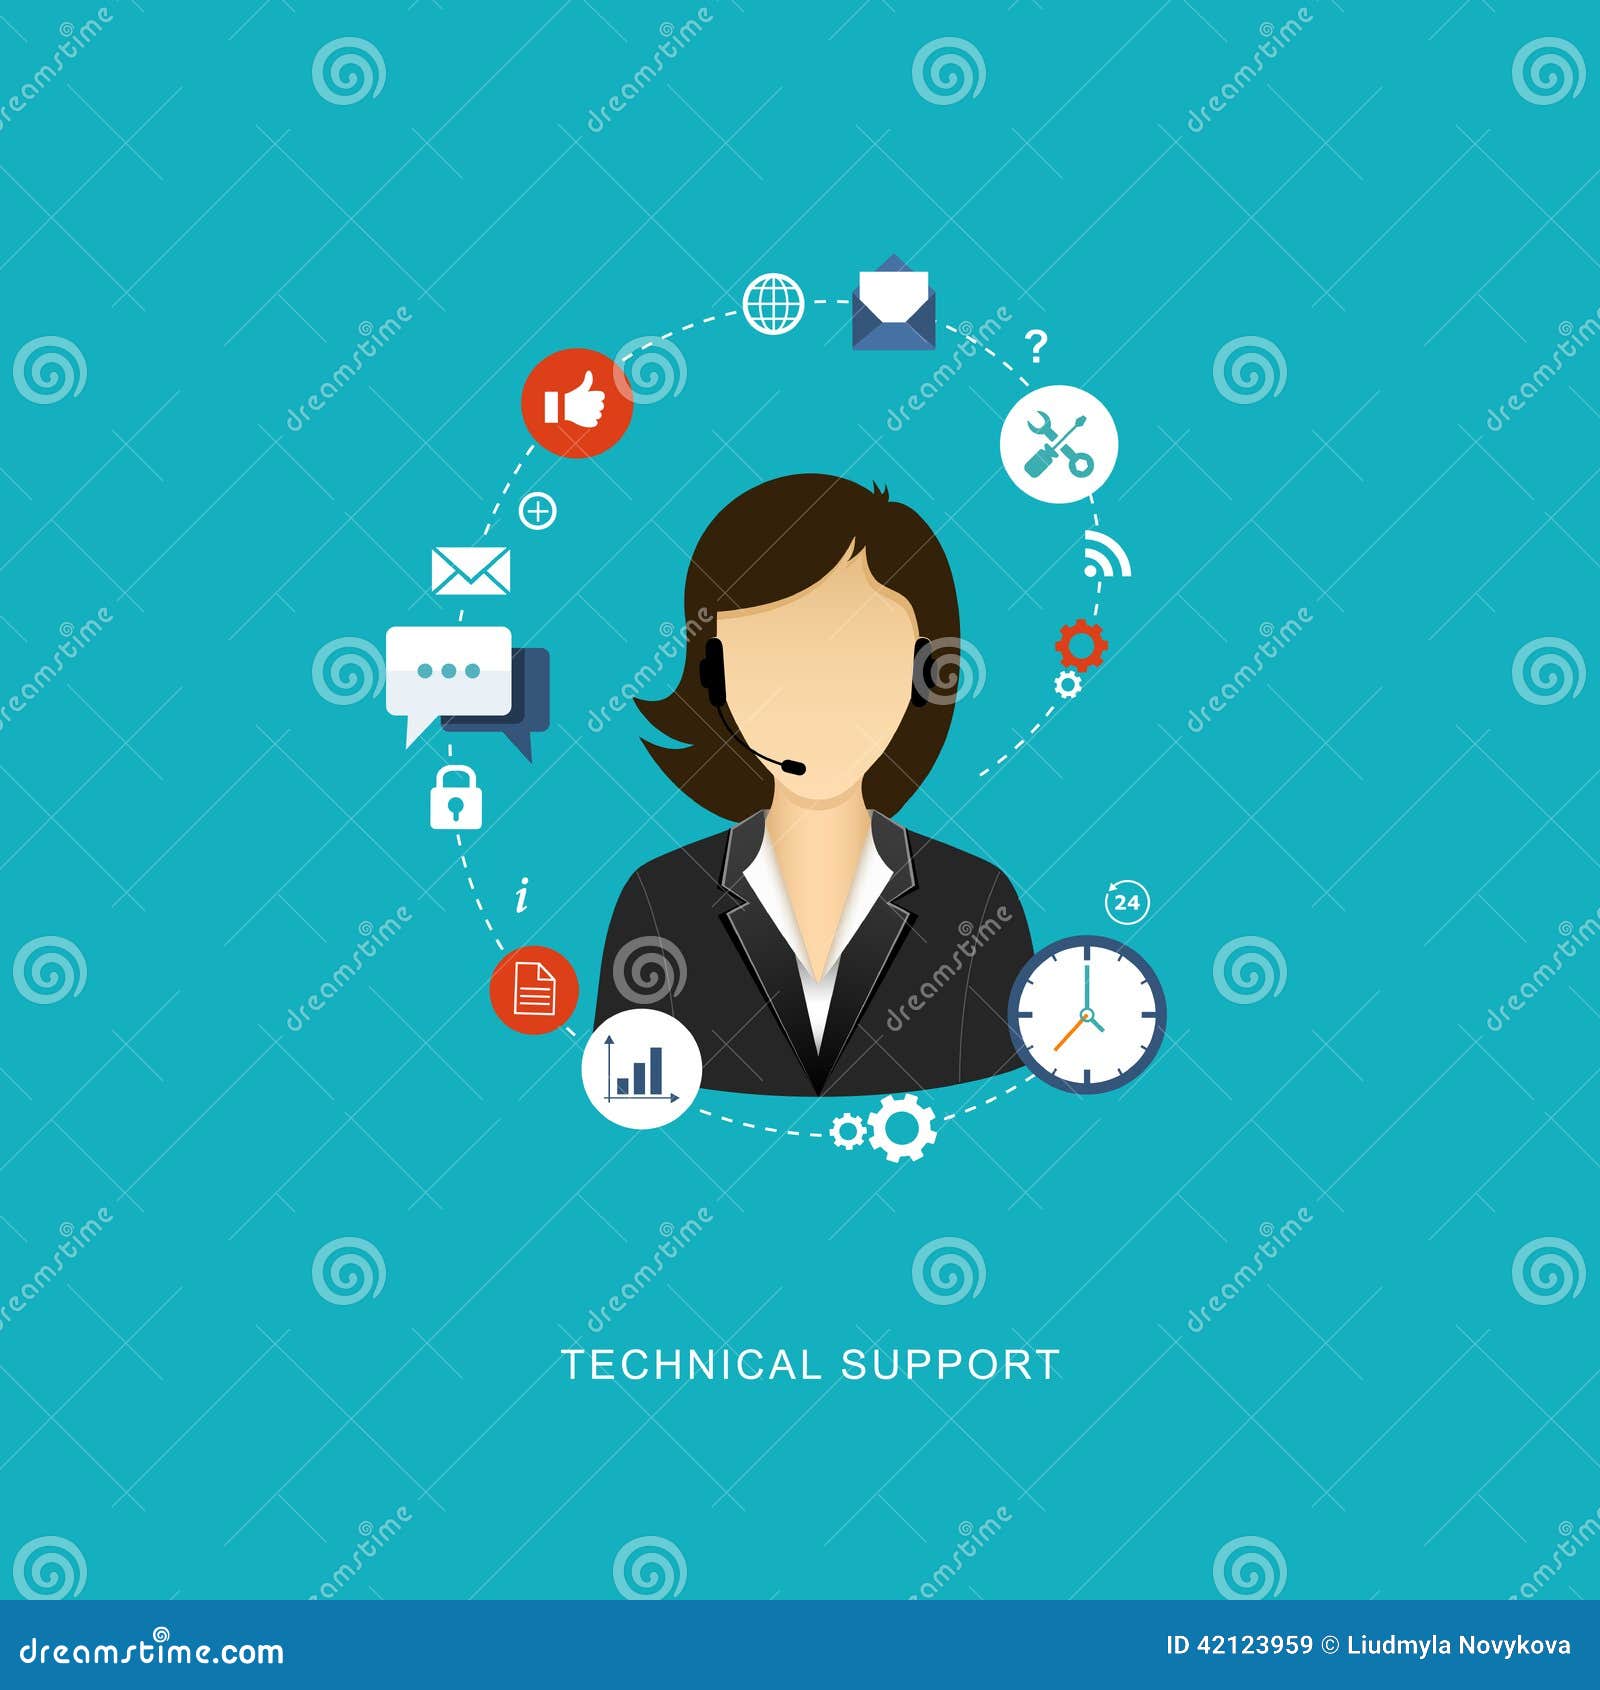 Flat Design Illustration With Icons Technical Support 